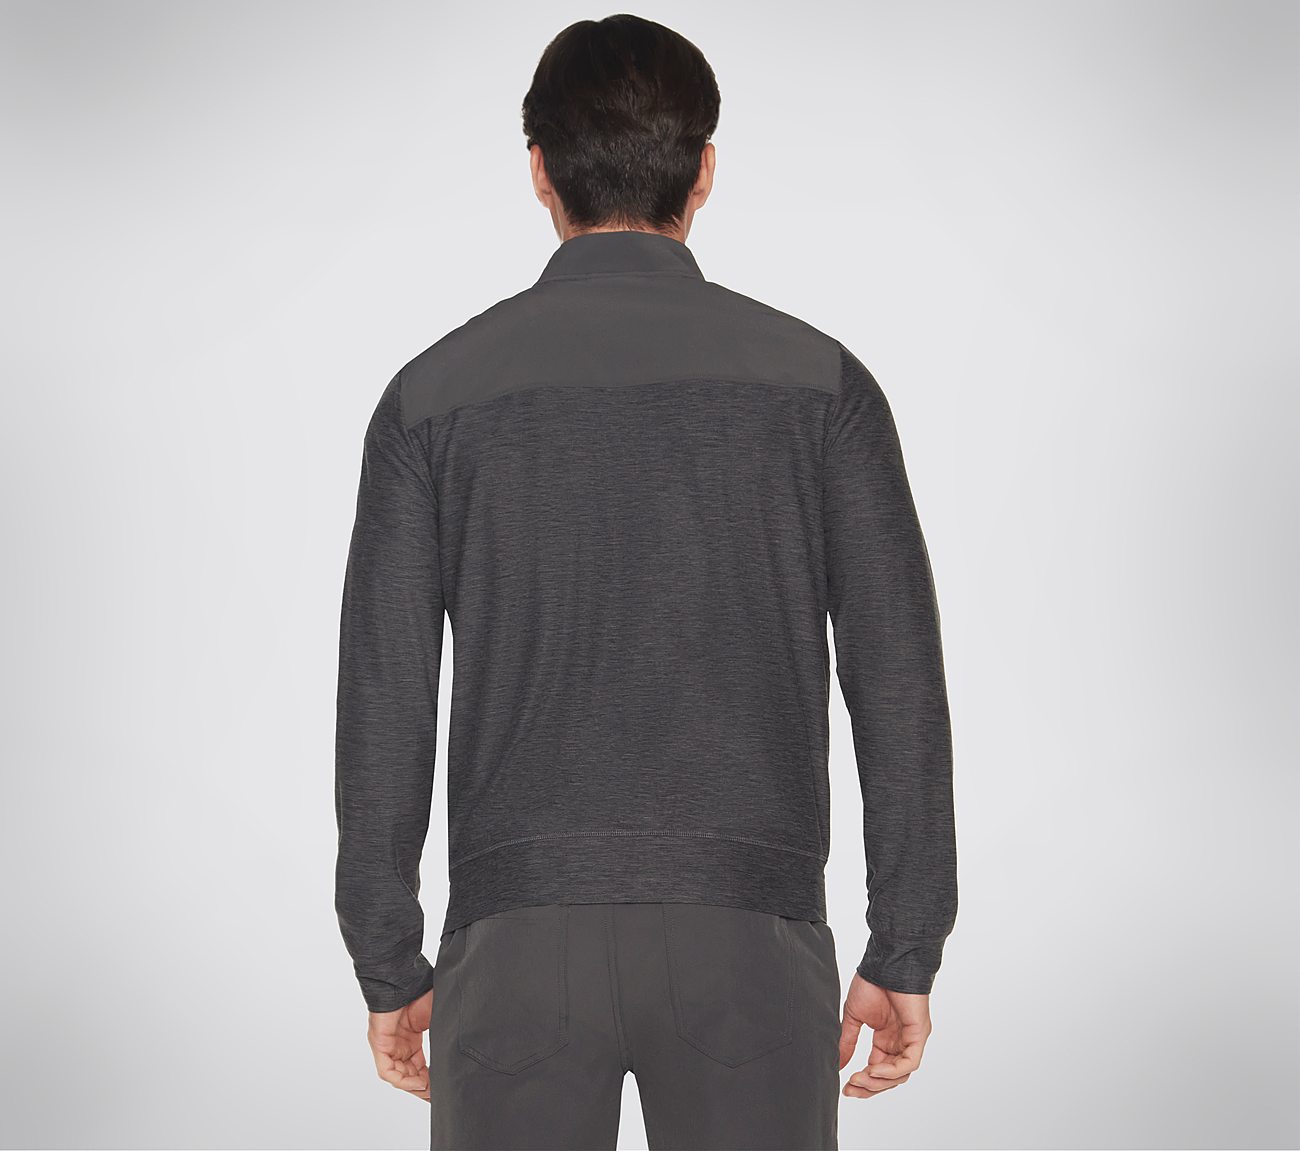 THE HOODLESS HOODIE ULTRA GO, BLACK/CHARCOAL Apparels Top View